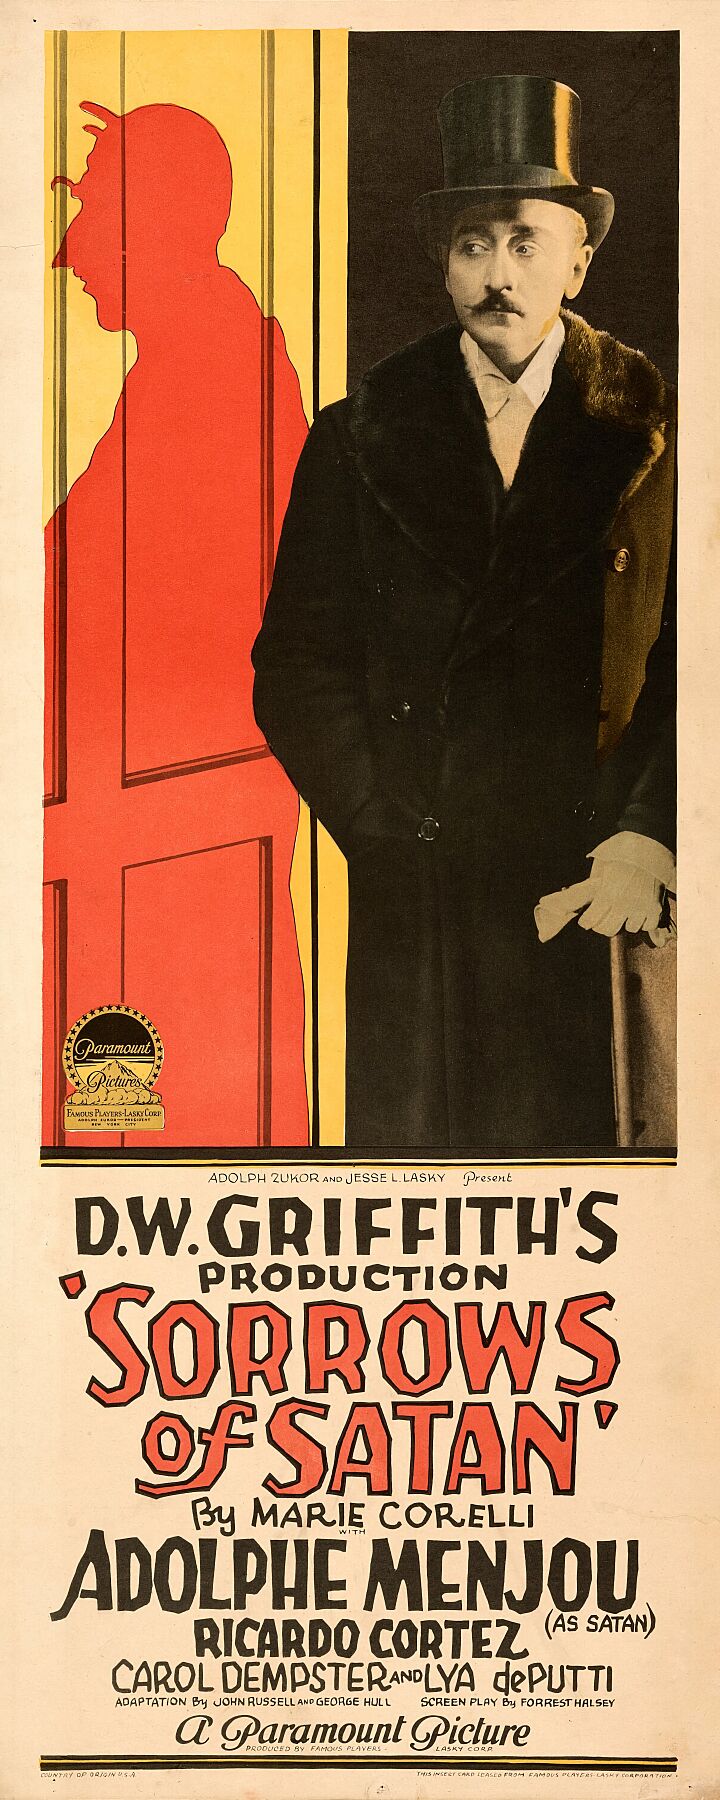 The Sorrows of Satan is a 1926 American silent film directed by D. W. Griffith